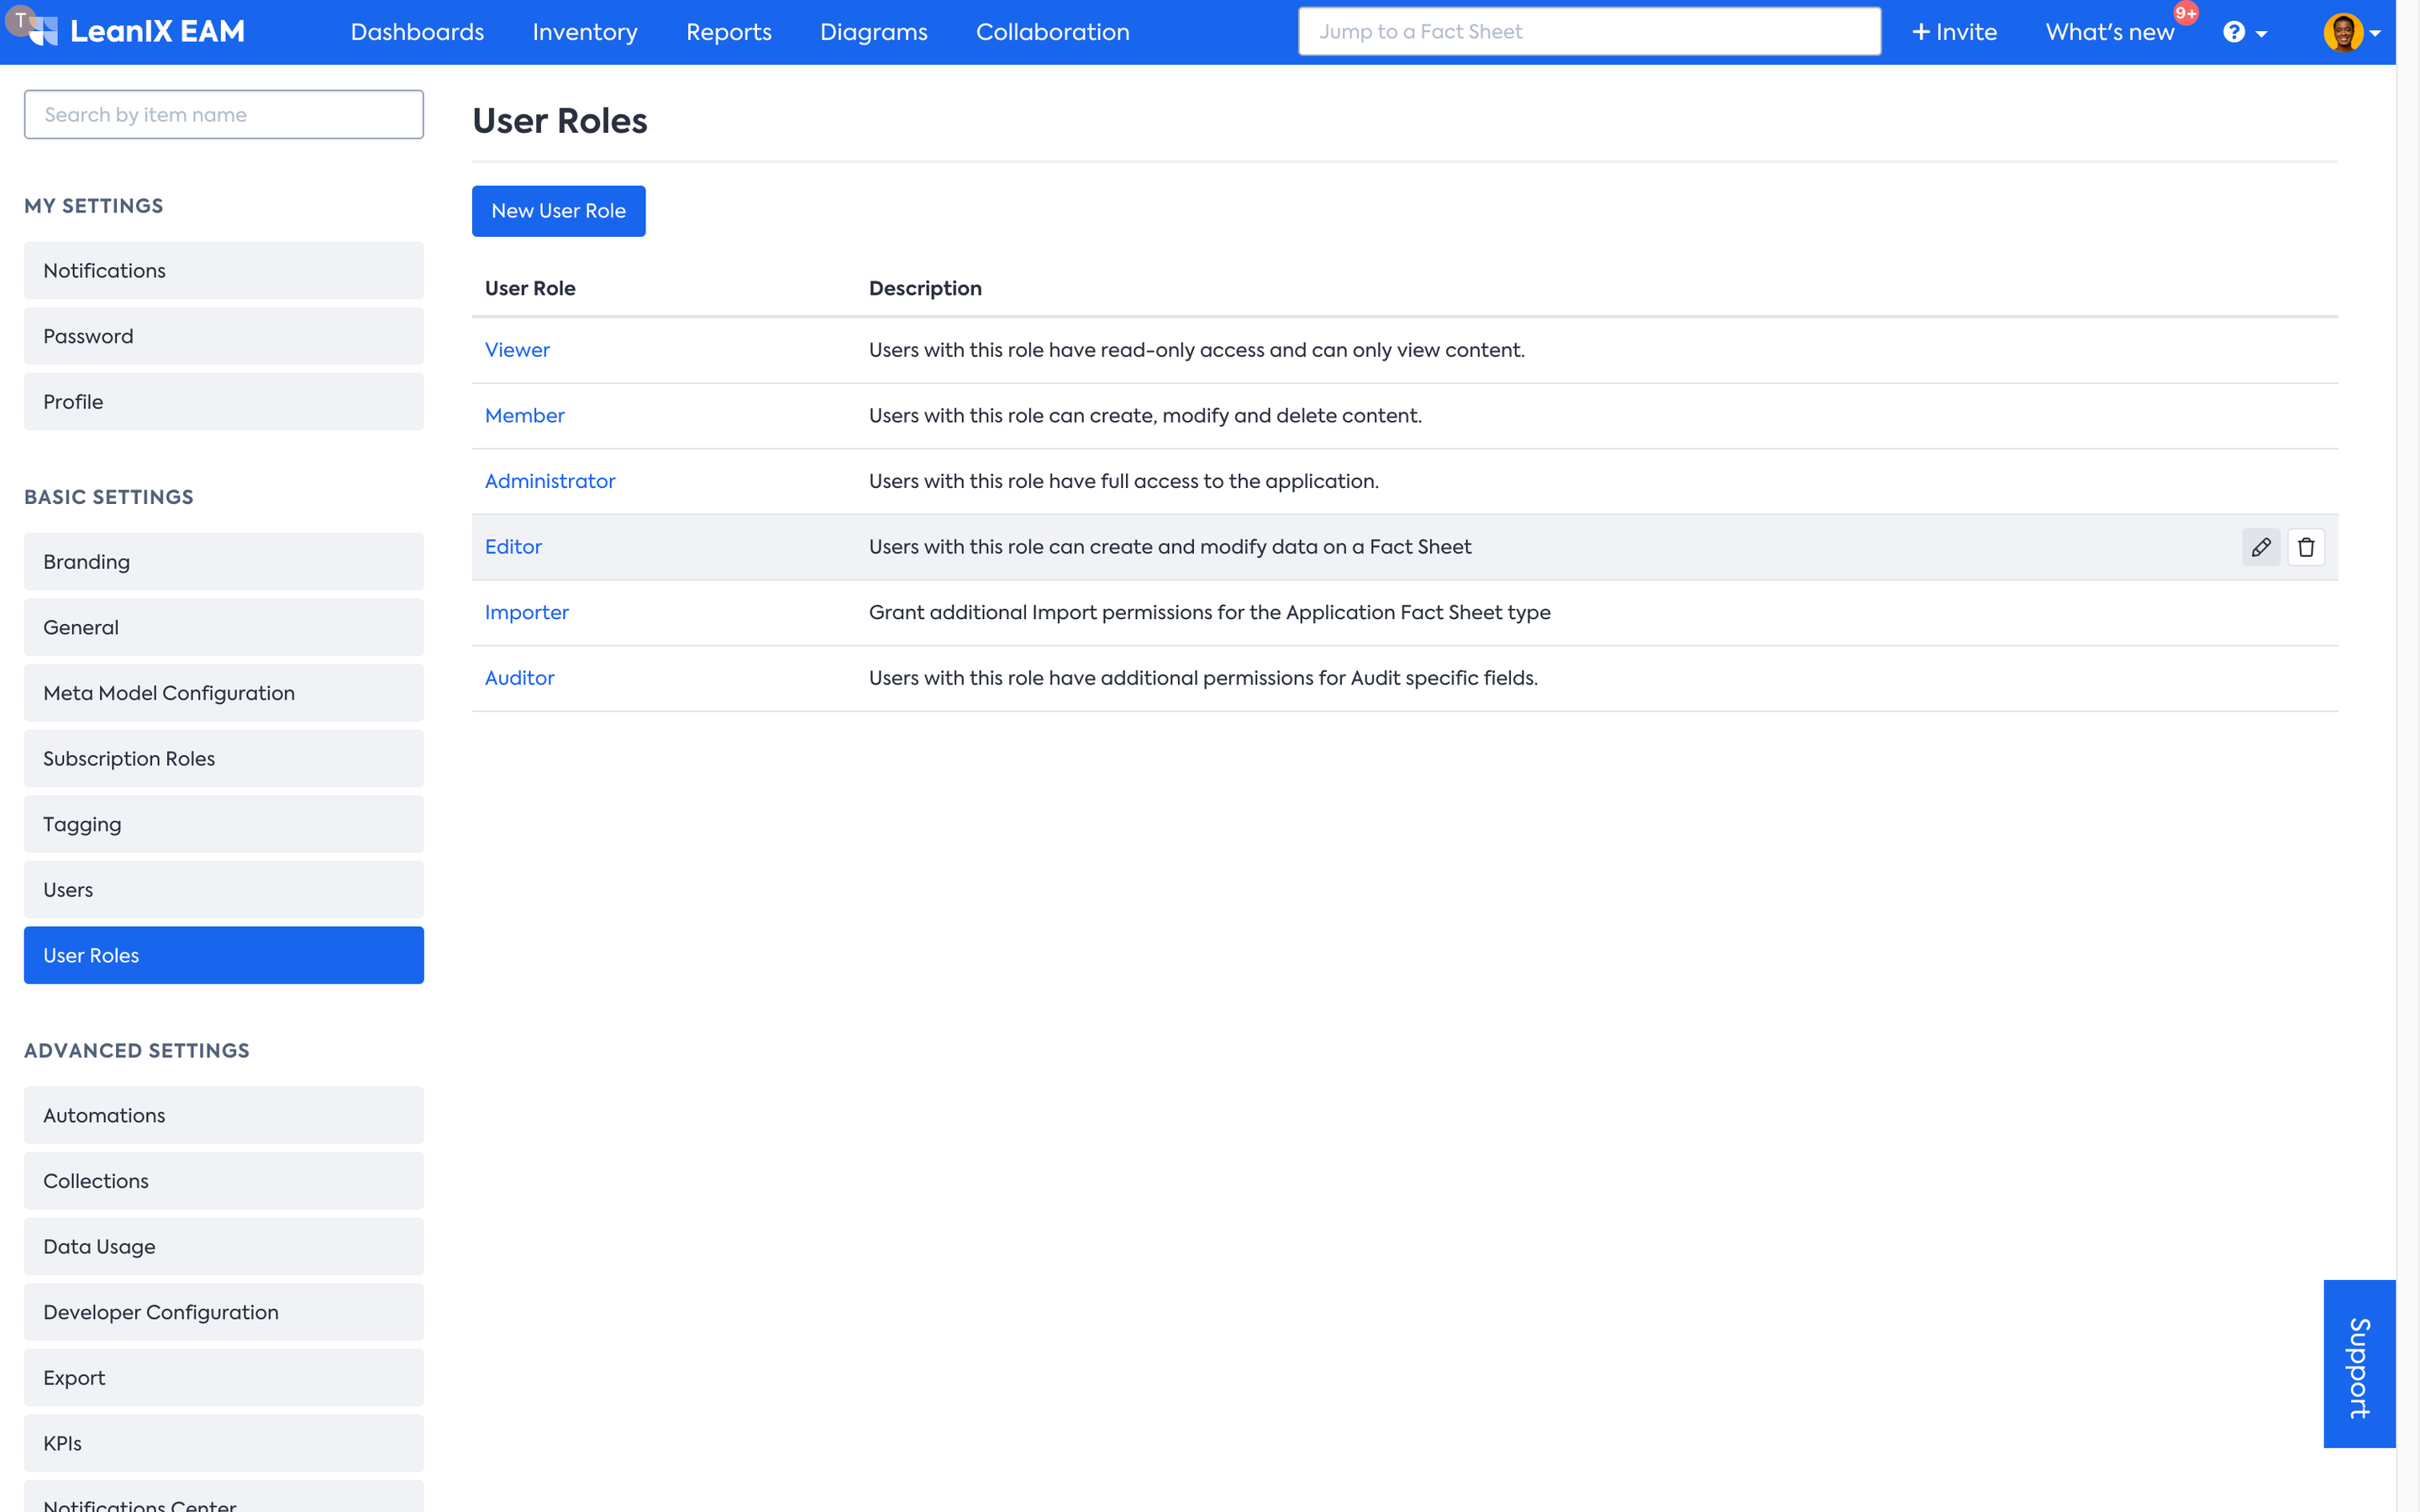 User Roles Overview page